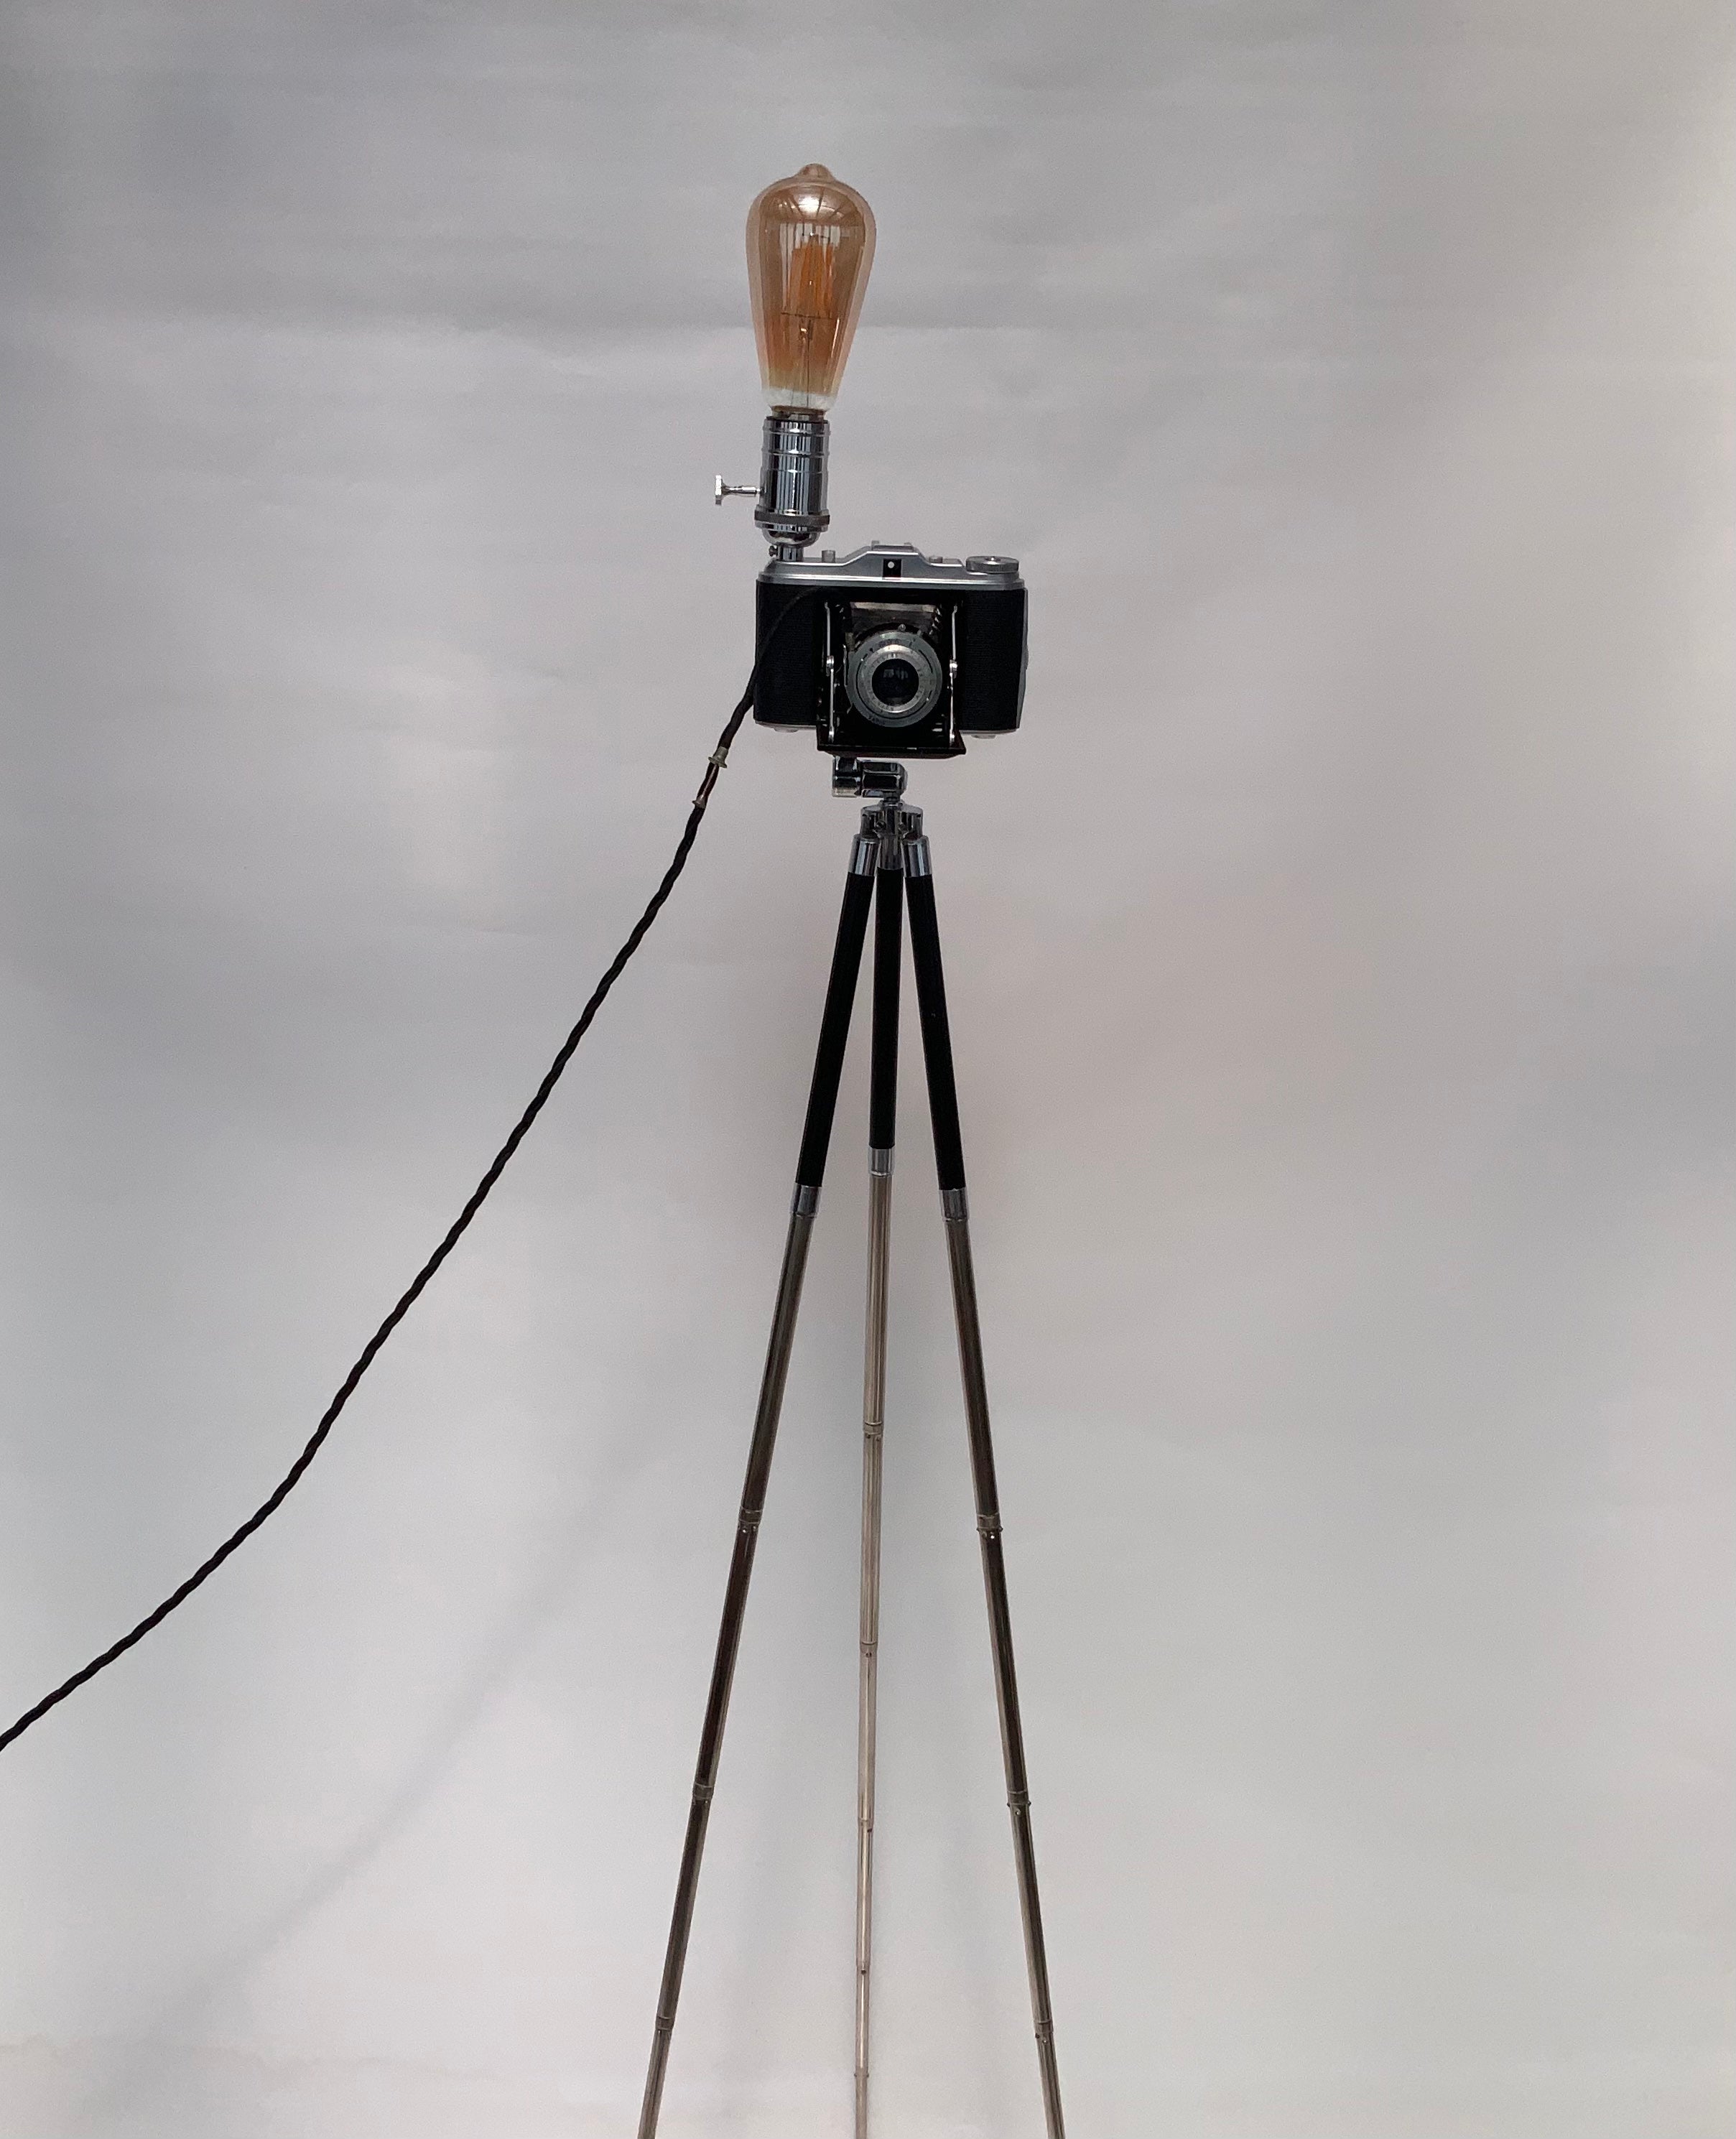 German Made 1960s Agfa Isolette repurposed into a stunning camera lamp.